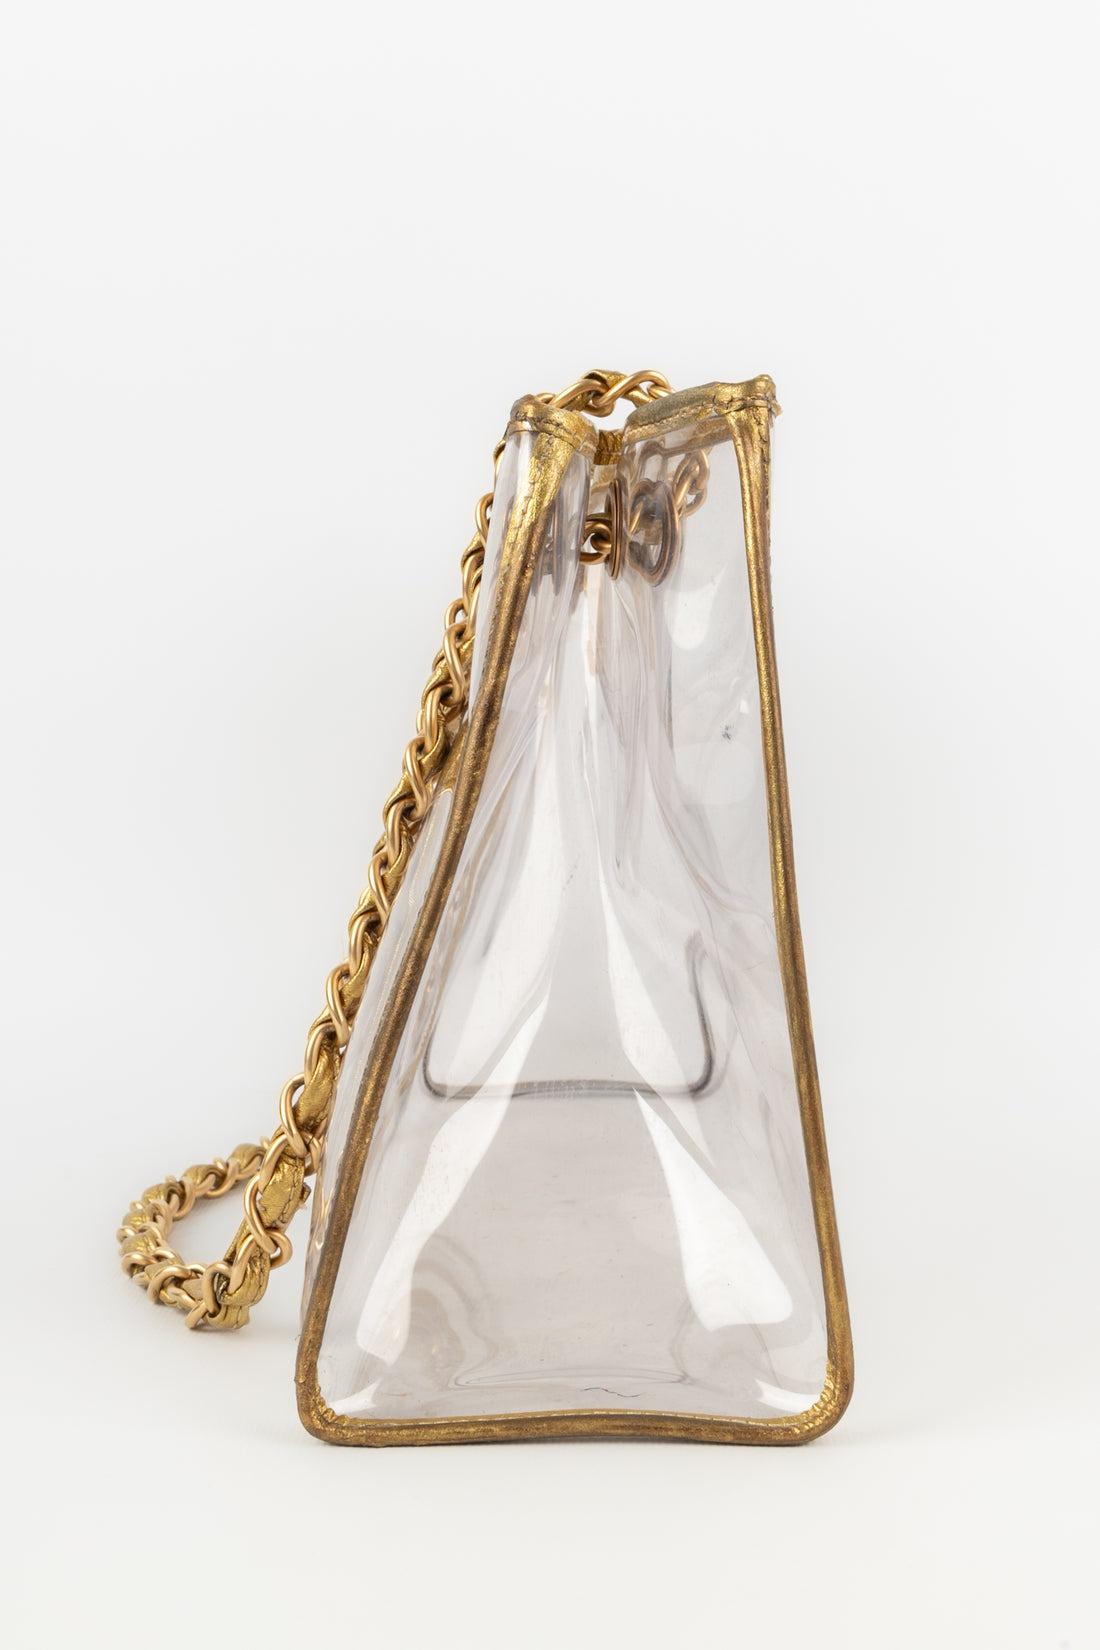 Chanel Hand Bag in Transparent PV Fabric, 2006/2008 2